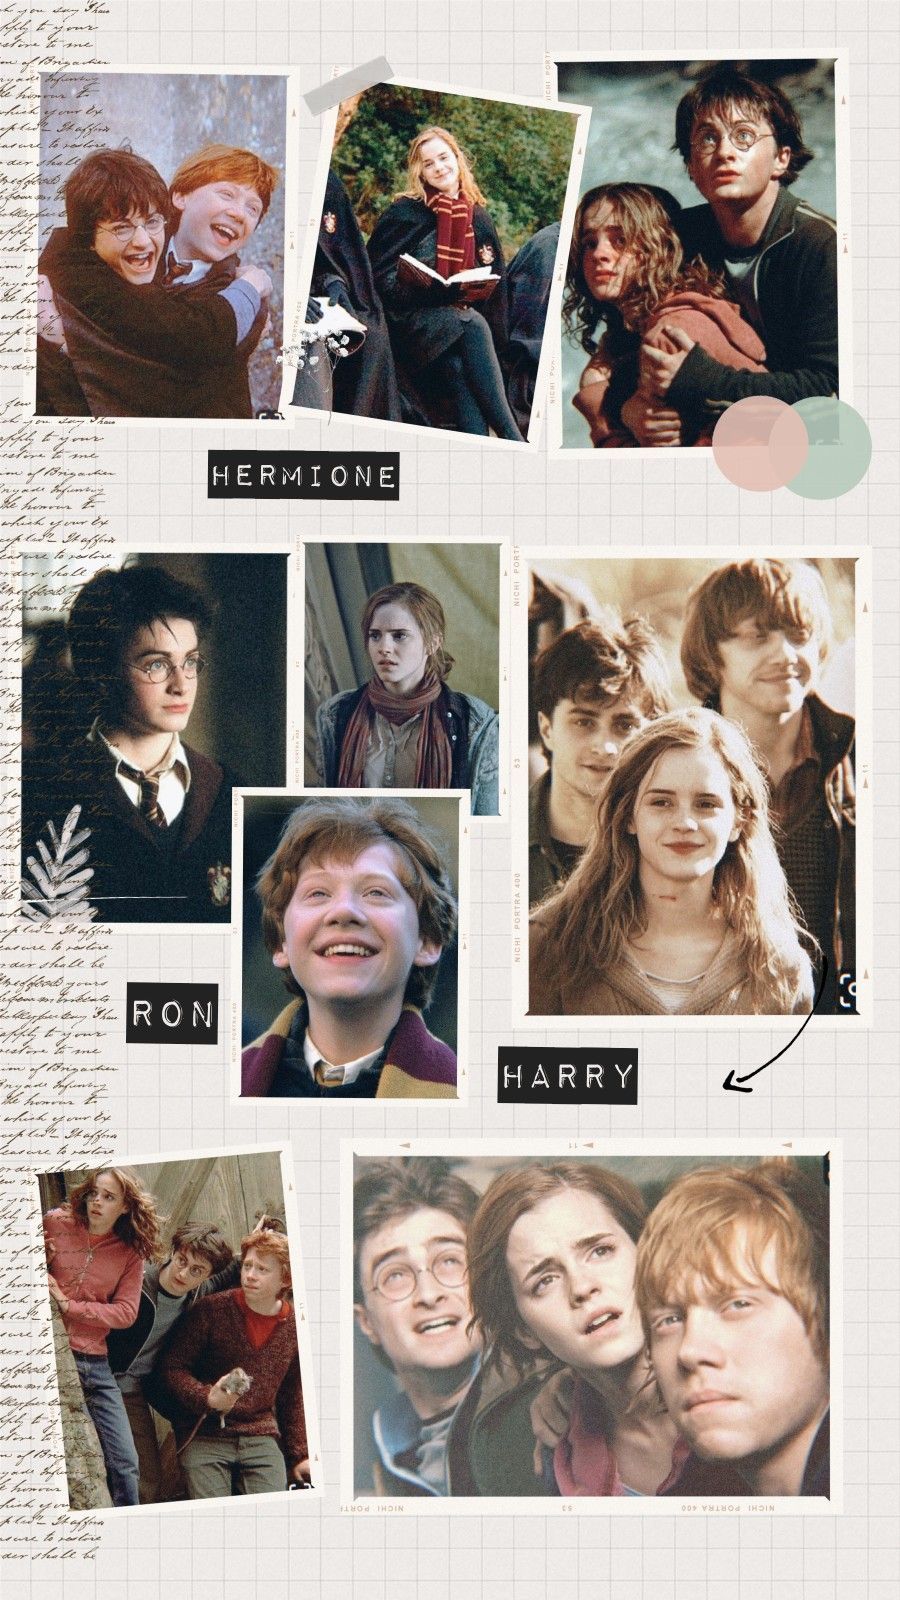 Harry potter. Harry potter wallpaper, Harry potter characters, Harry potter picture